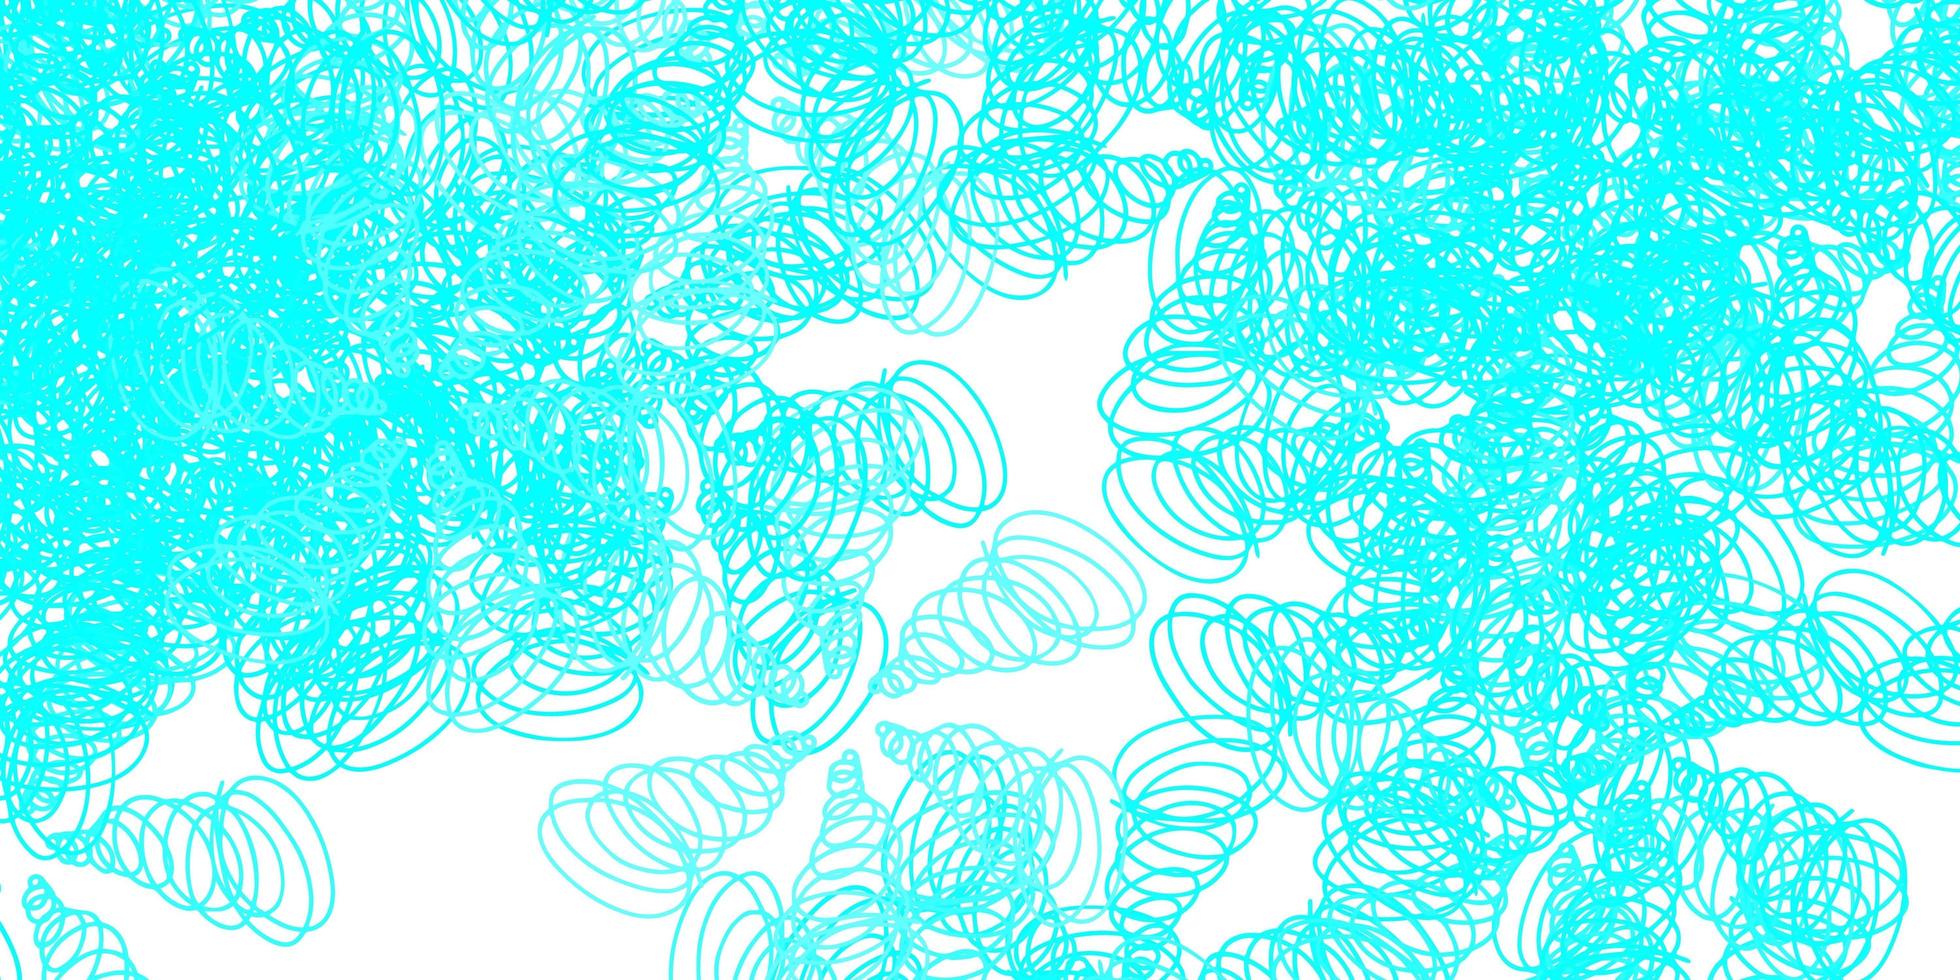 Light blue green vector background with lines